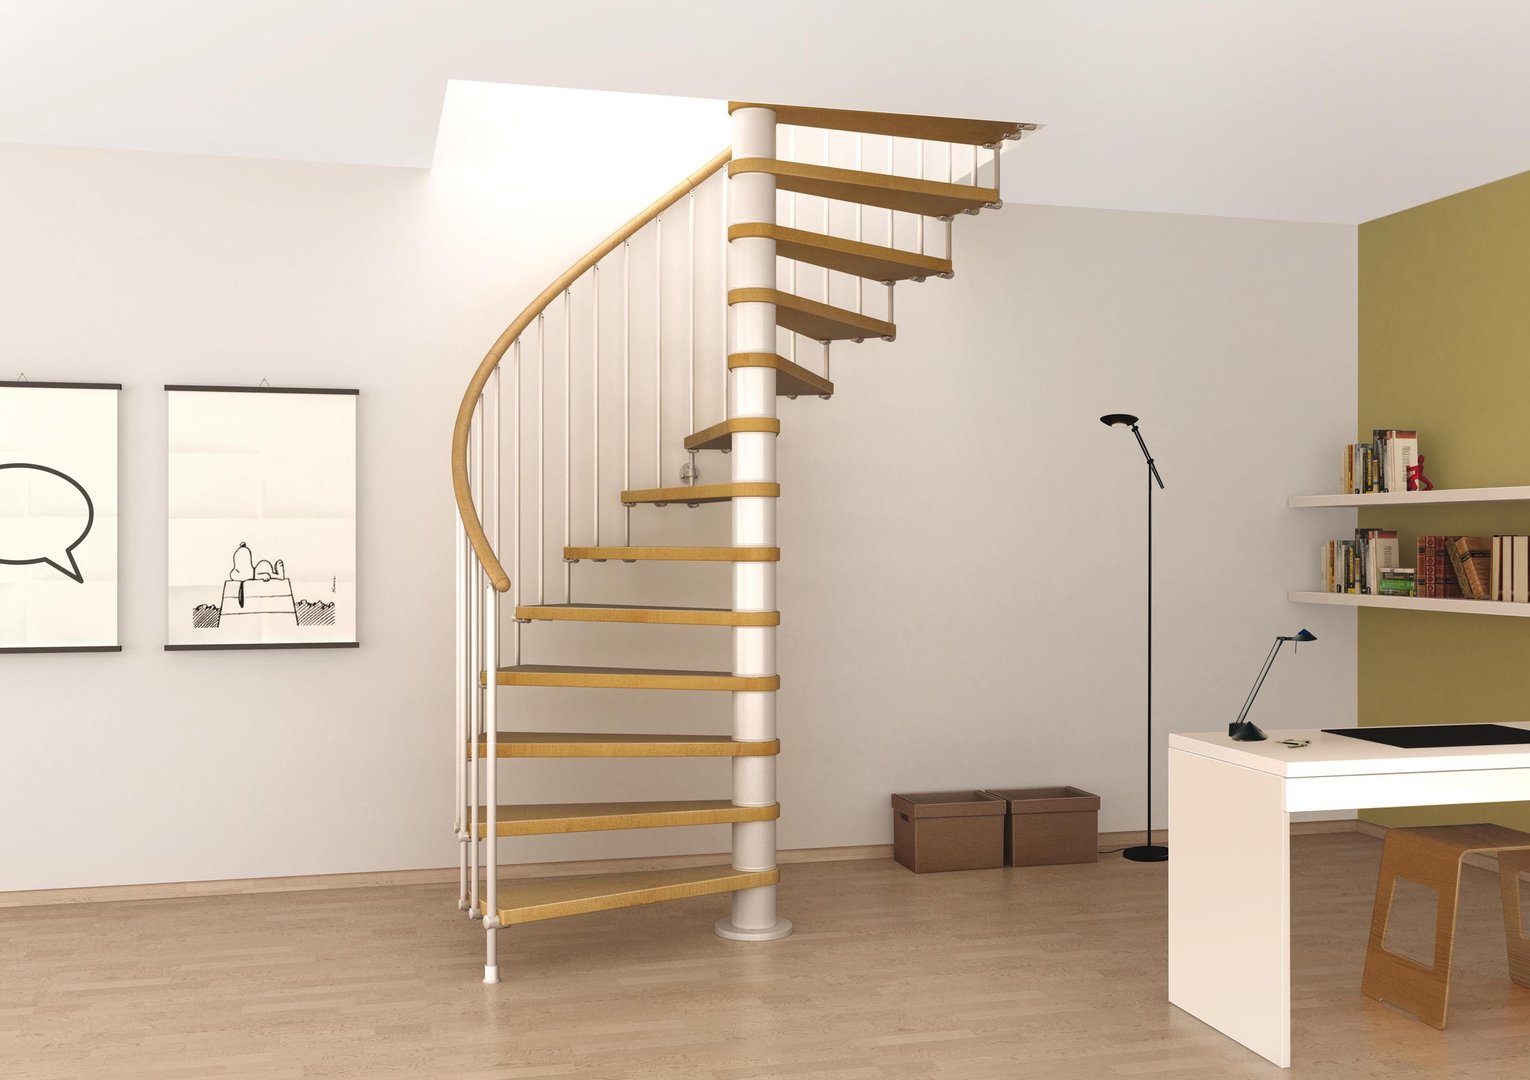 Space Saving Spiral Staircase Type "Toscana" l00l Stairs